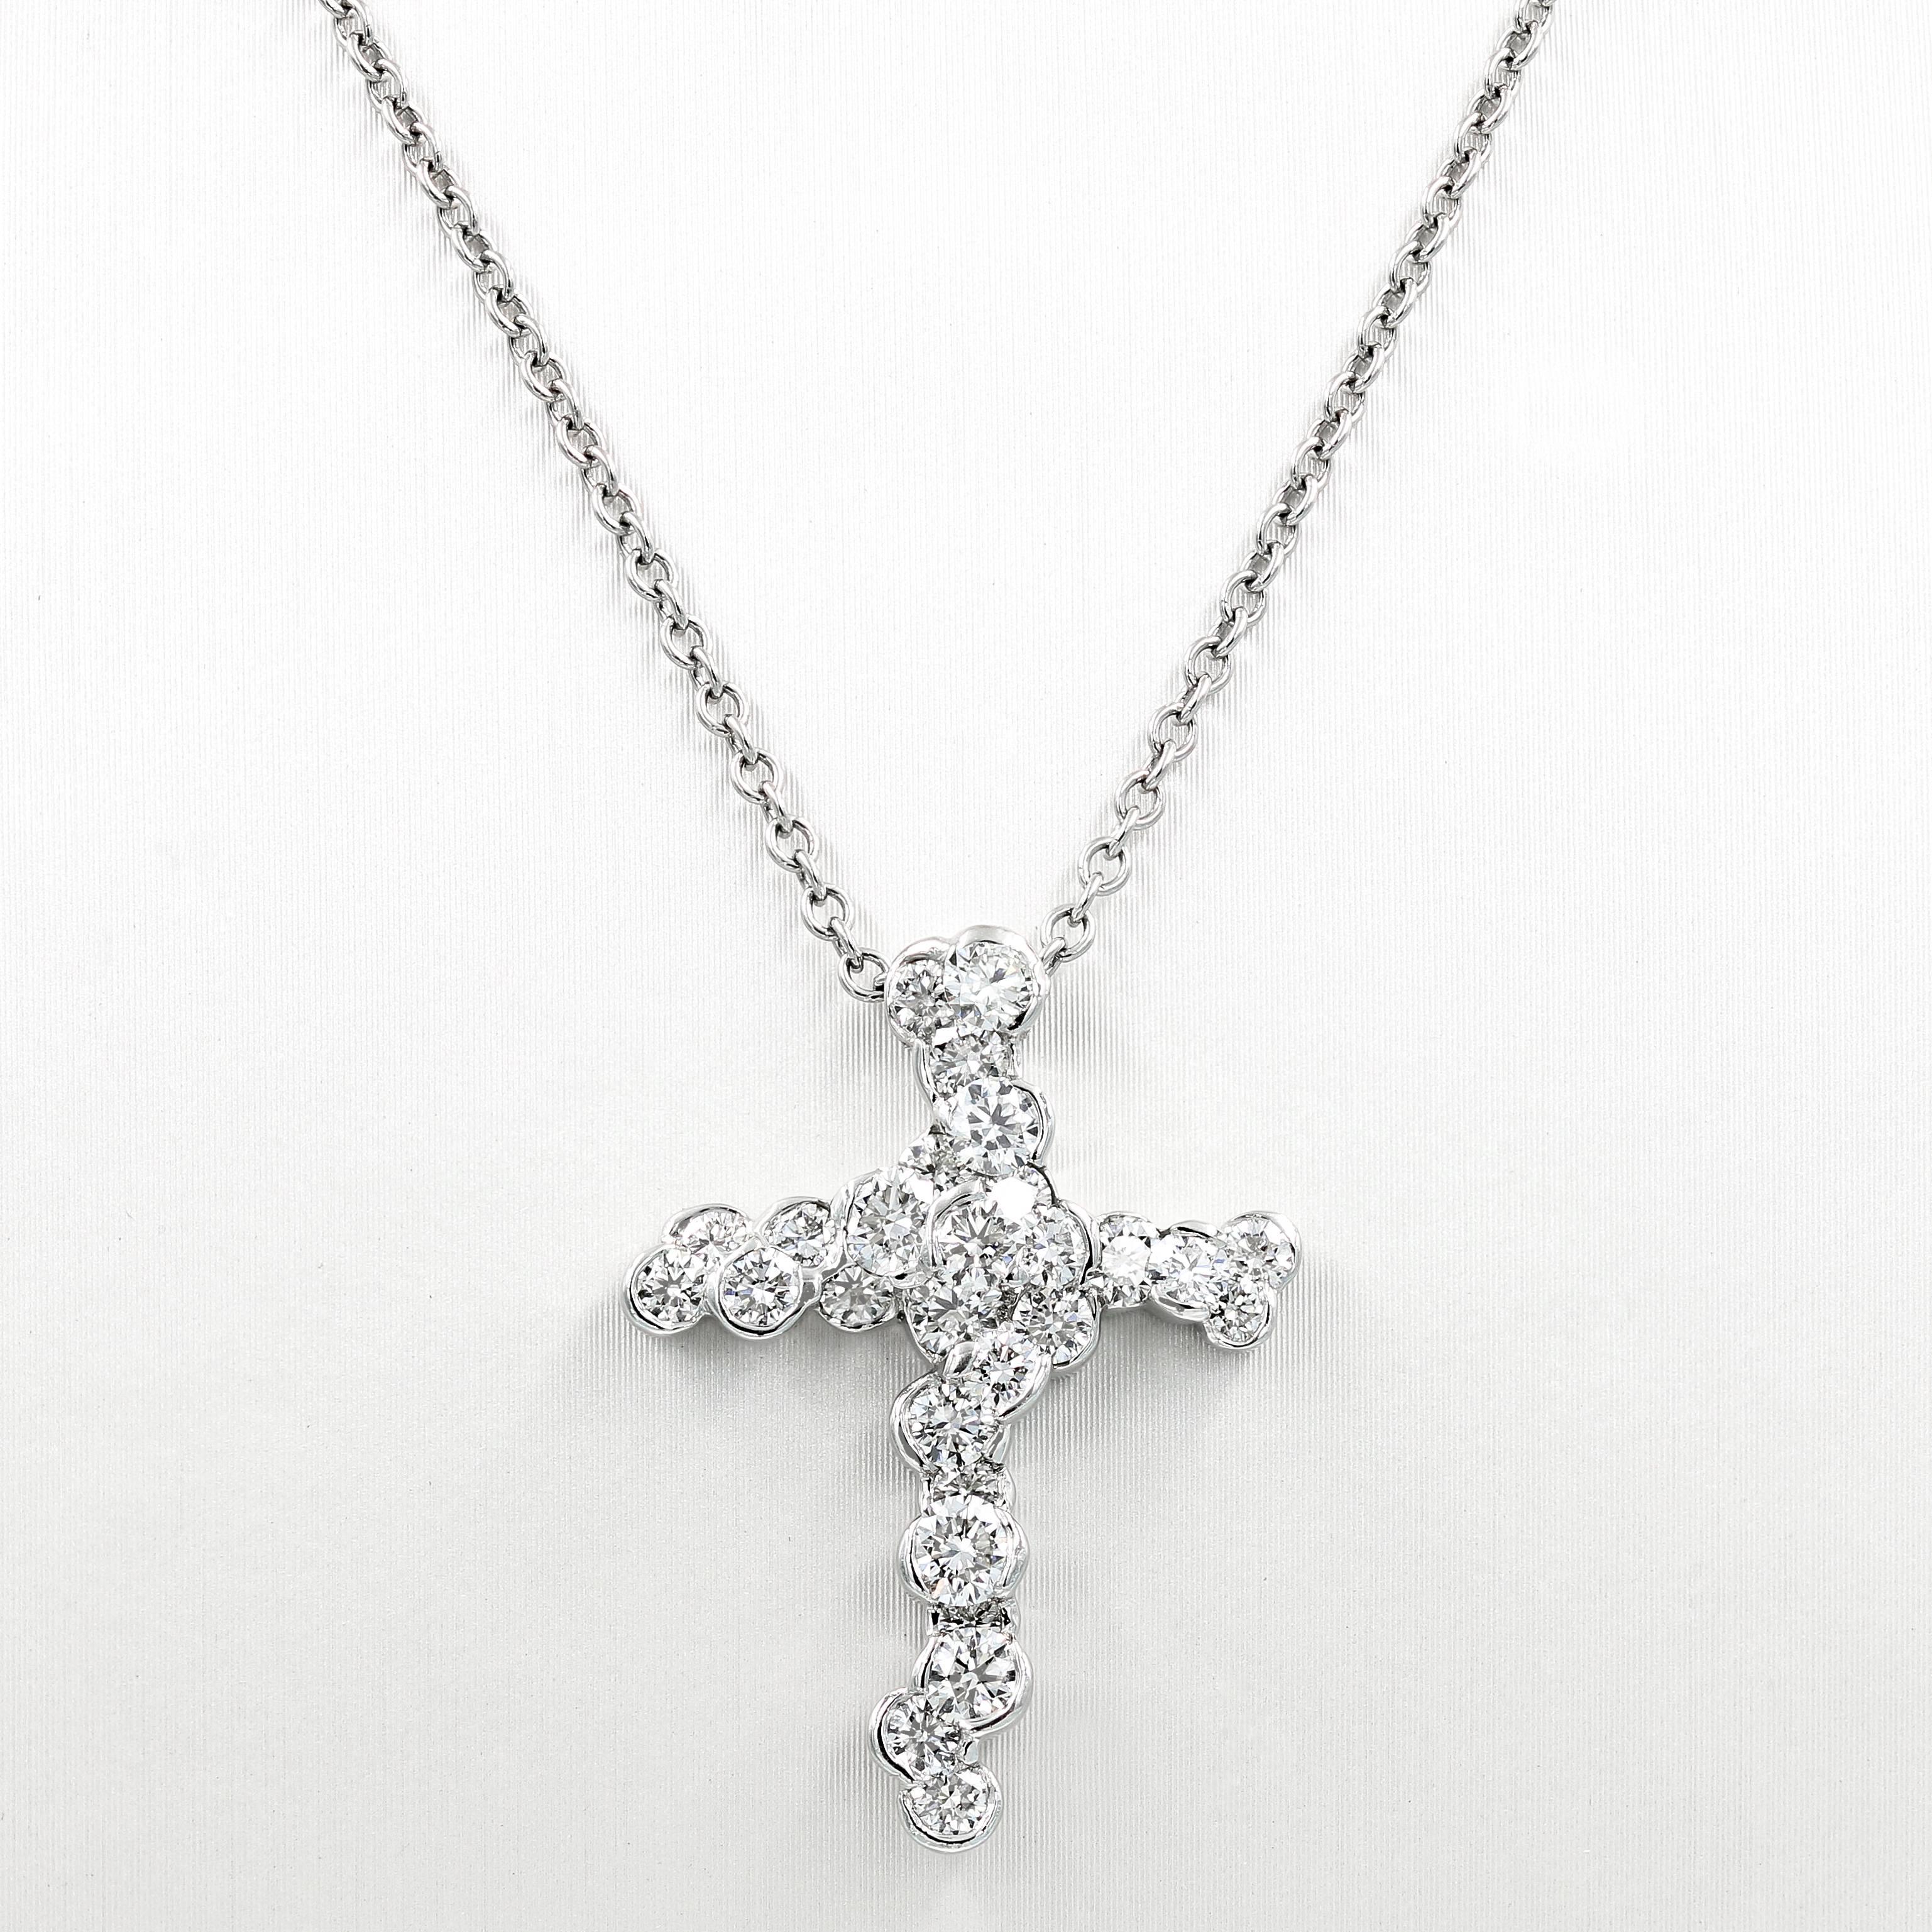 This creative custom crafted Lester Lampert CumuLLus® style necklace is set in platinum. It contains 28 ideal cut round diamonds= 1.73cts. t.w.  (the diamonds are G in color and VS clarity)

The piece is suspended from a platinum chain that is 18